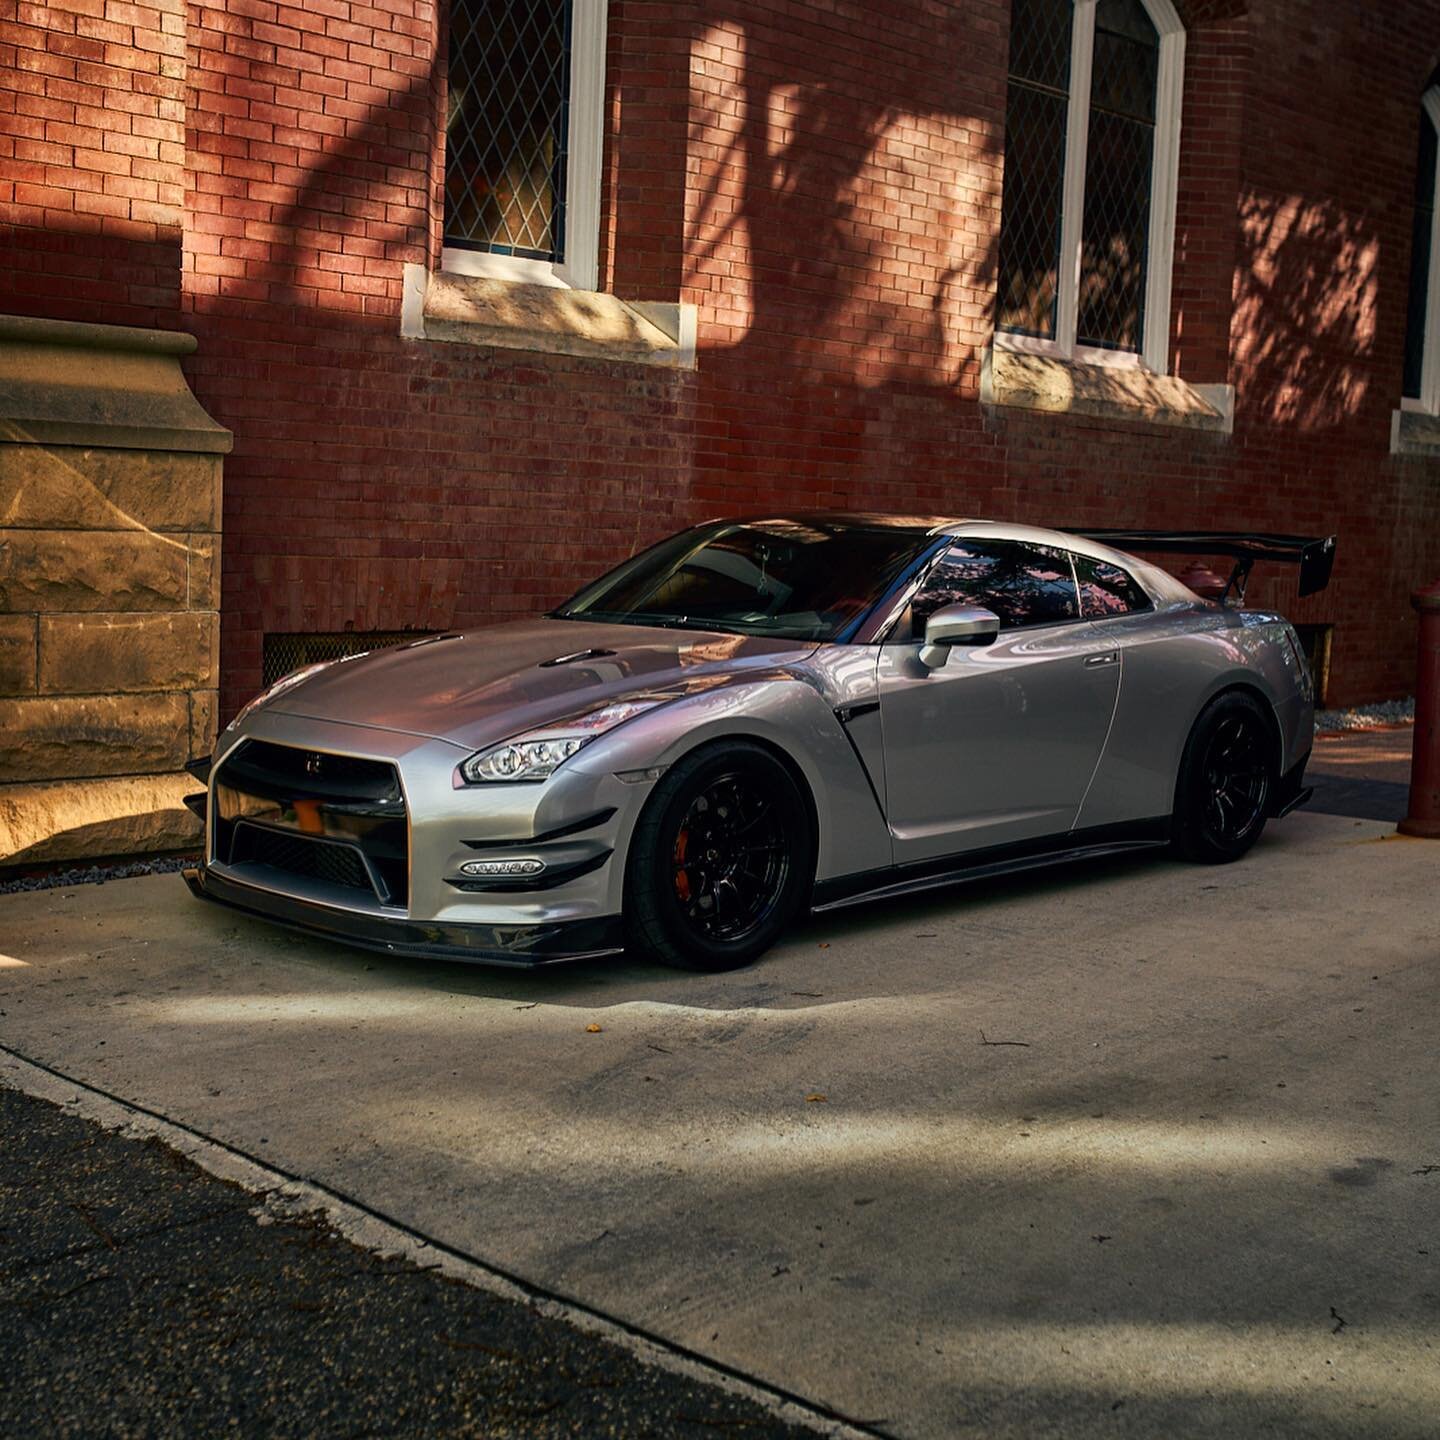 3/3 May need to get back to TN &amp; GA and link with the homies and do some car related projects. 

📸: @thecarcreative 
💻: @52visuals 
🚗: Nissan GTR 

Thanks to @thecarcreative for the images to edit! He&rsquo;s a great car photographer definitel